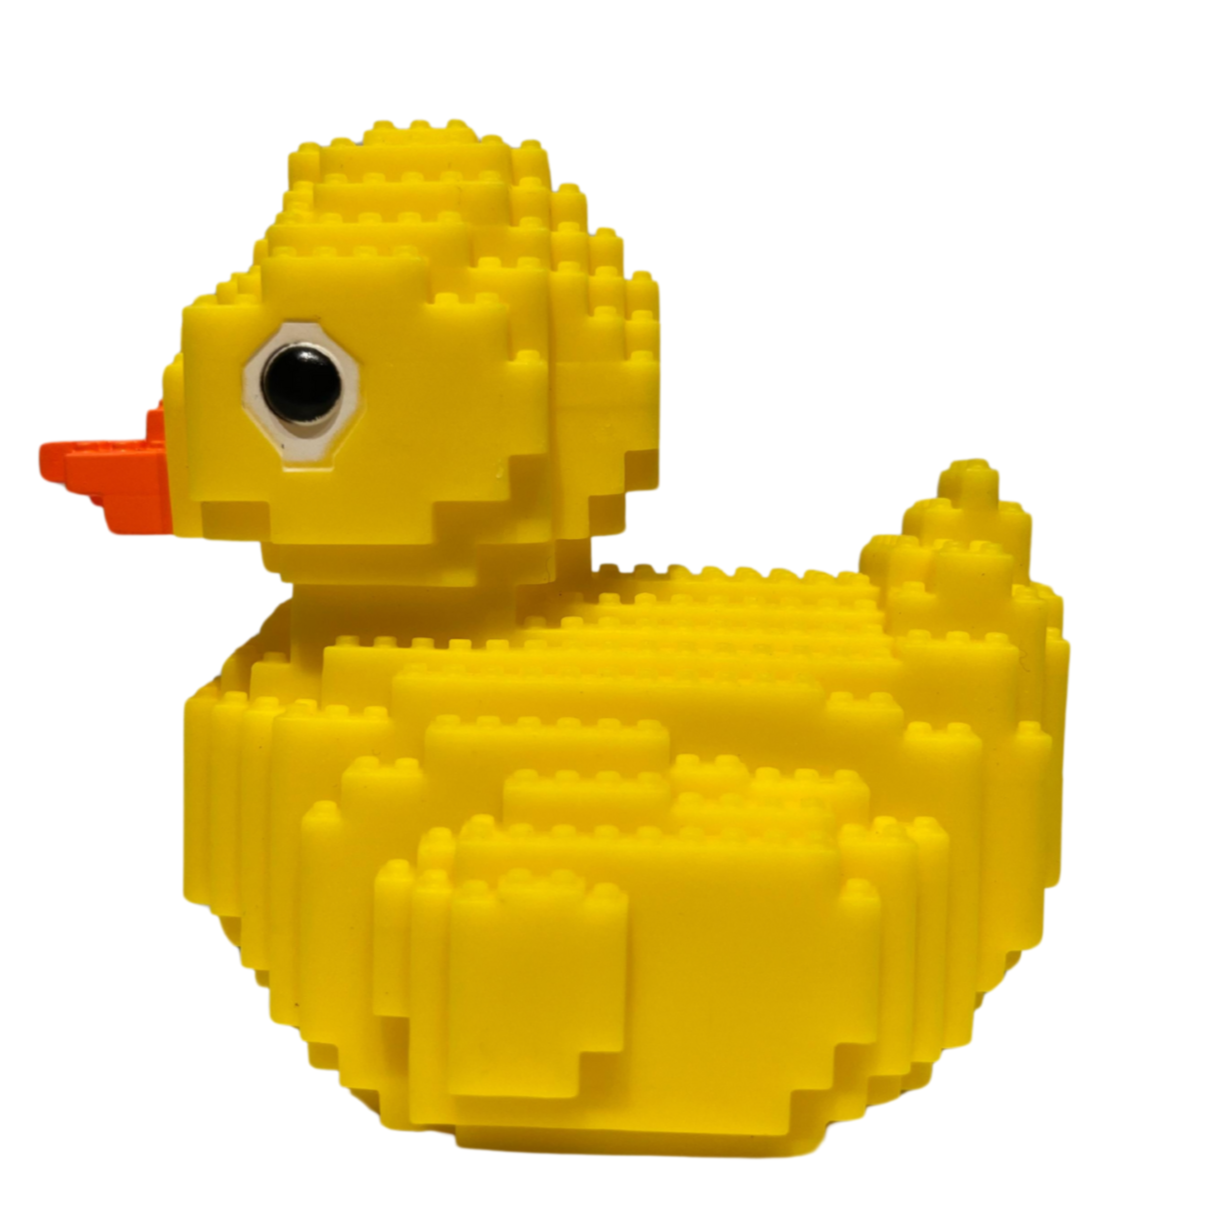 Lego Rubber Duckie Side View